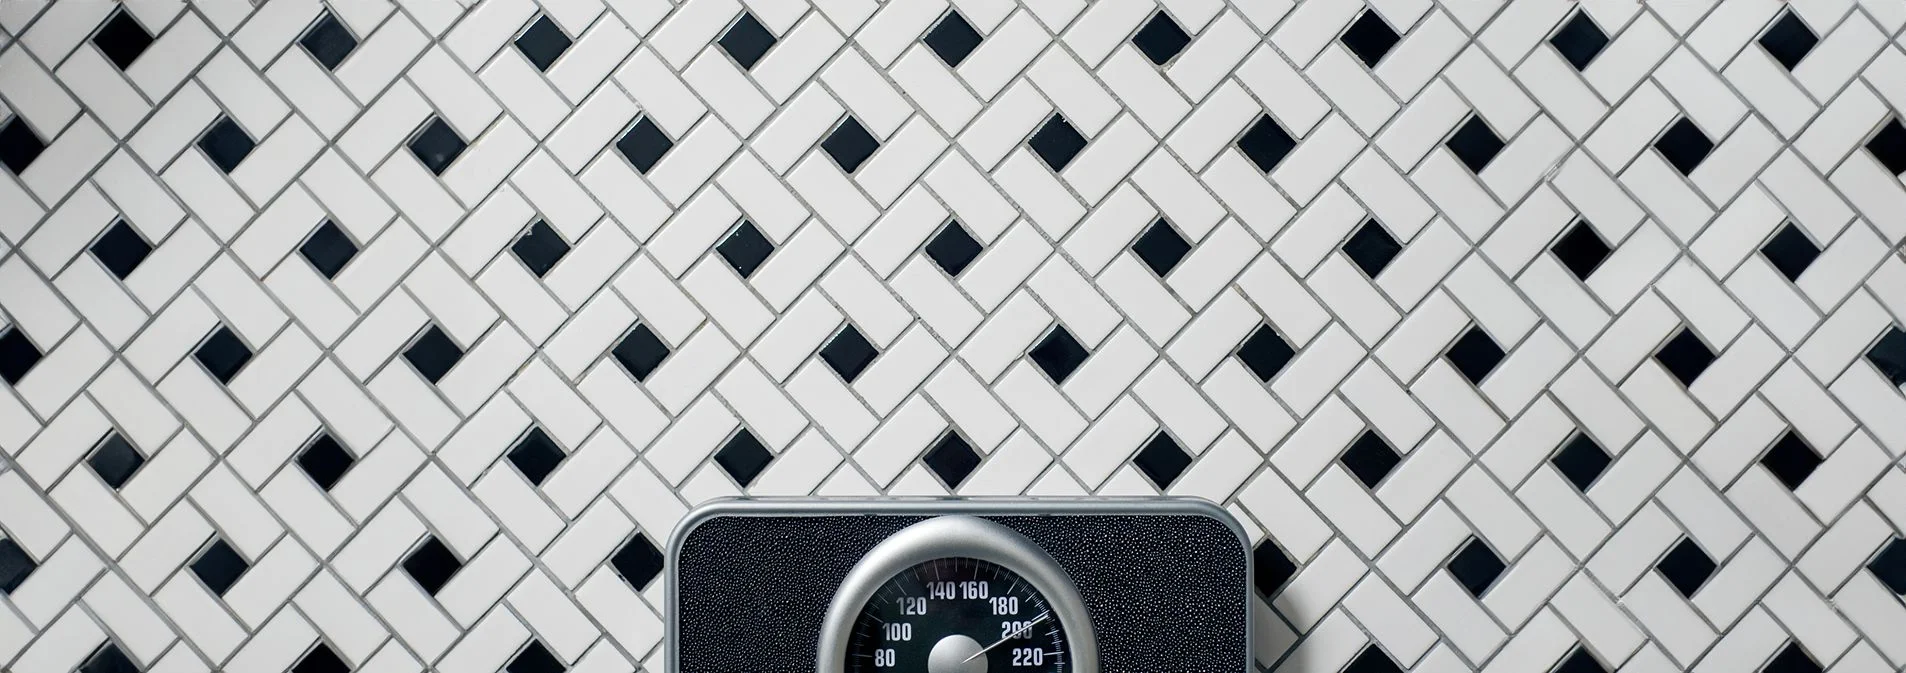 Scale on a black and white tiled floor